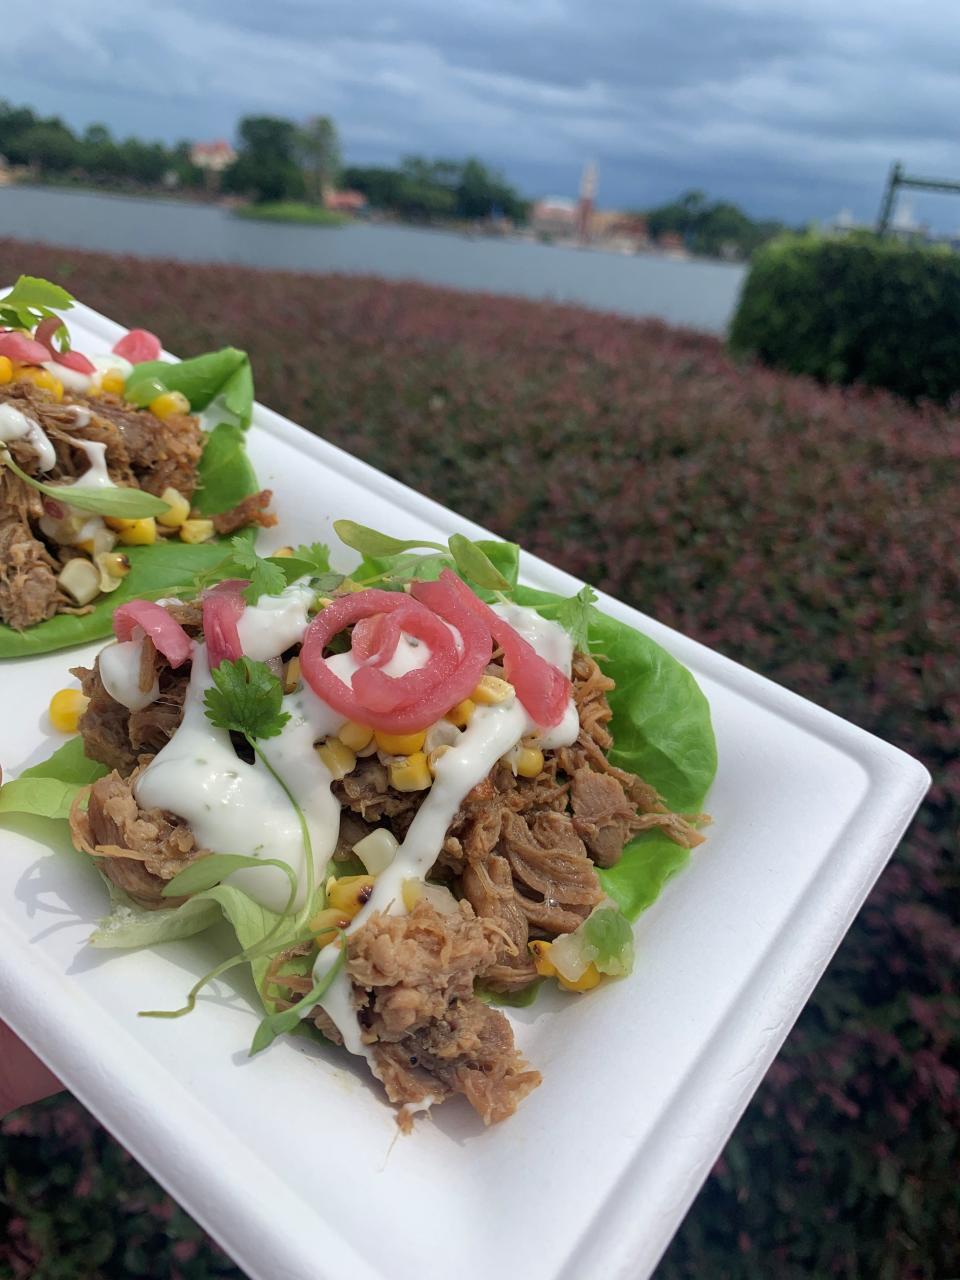 The grilled pork shoulder lettuce wrap at the Swanky Saucy Swine kitchen is one of the new offerings at the EPCOT International Food & Wine Festival.